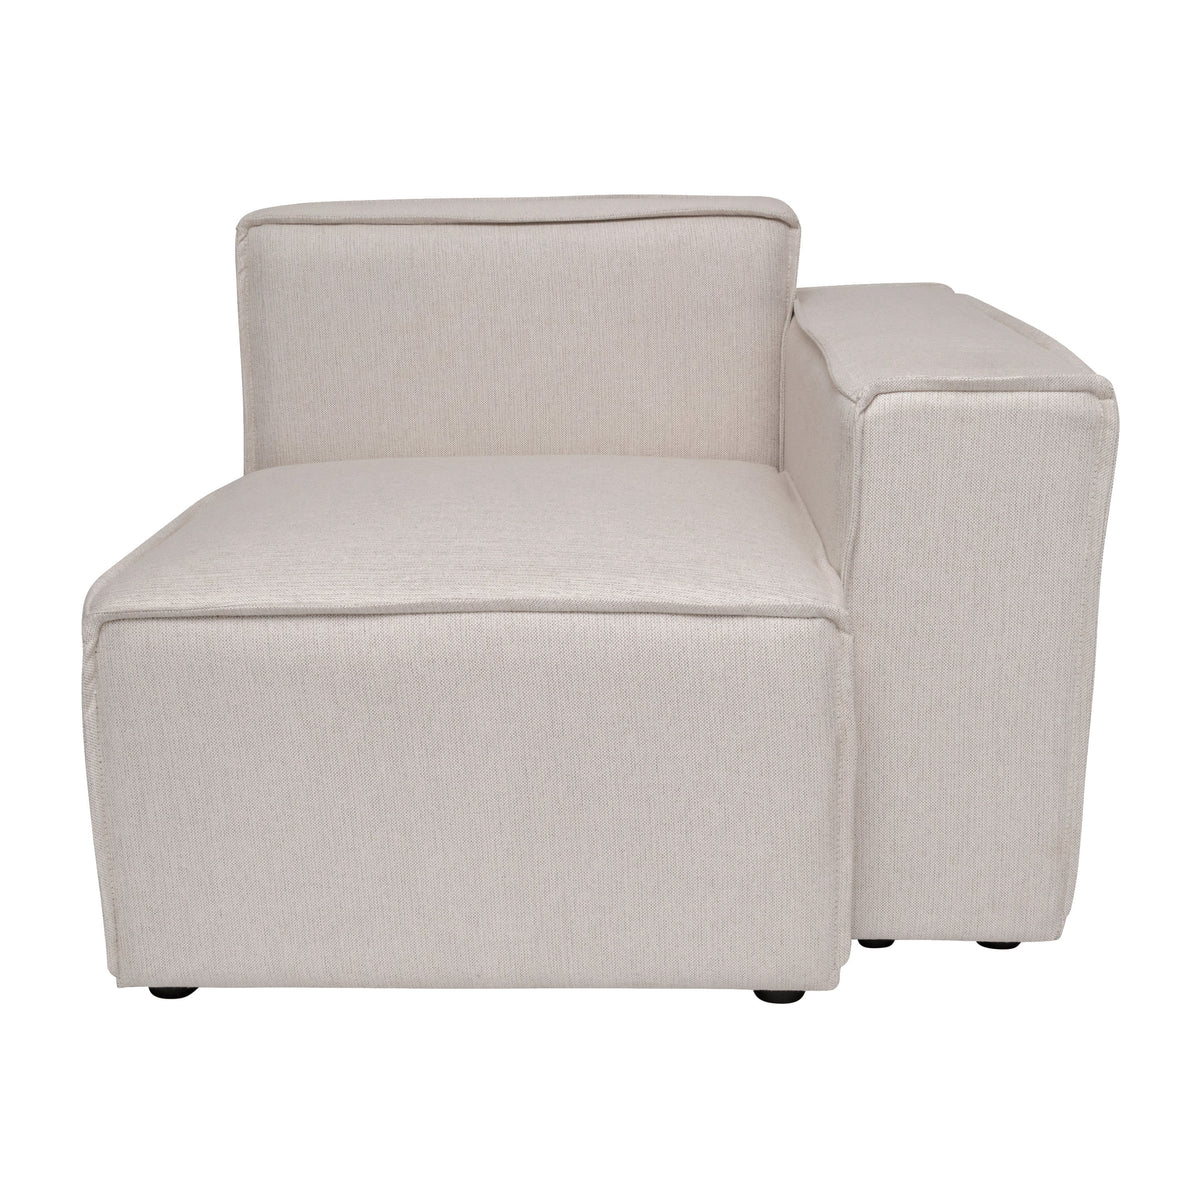 Cream |#| Contemporary Modular Sectional Sofa Right Side Chair with Armrest - Cream Fabric